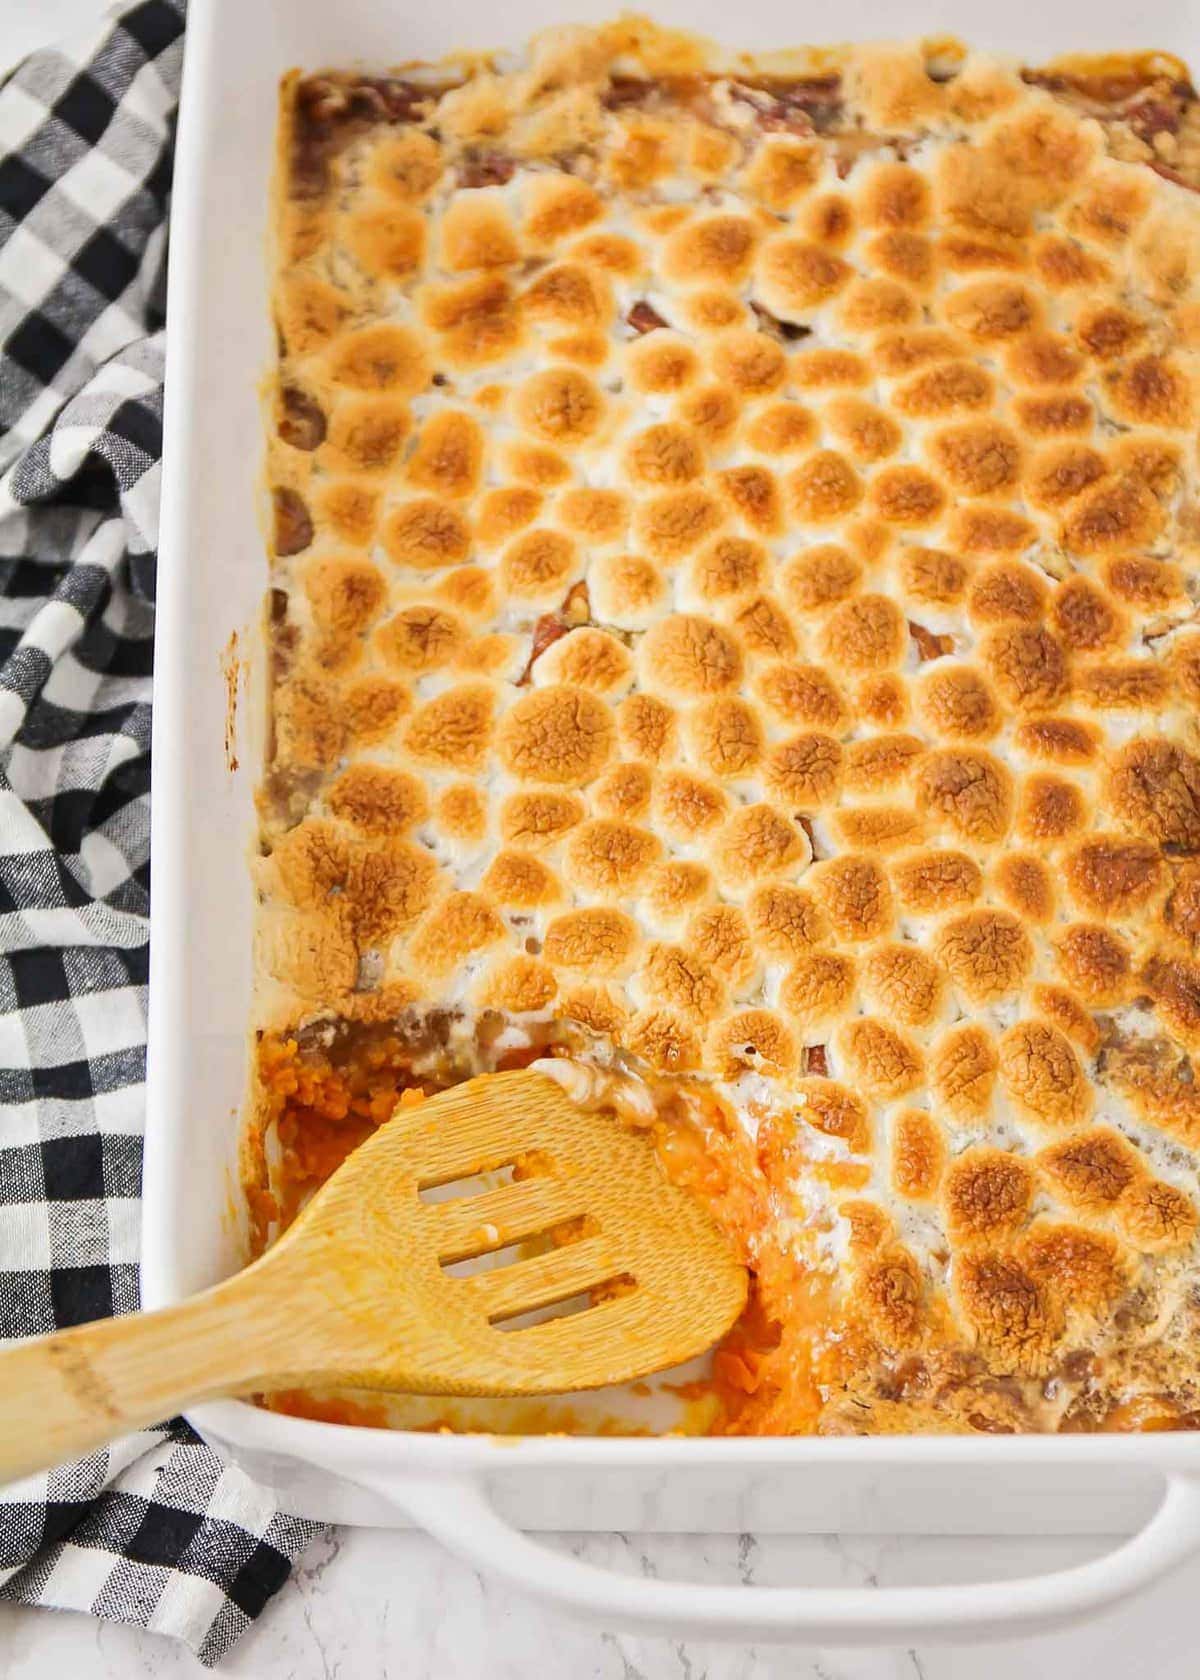 Sweet potato casserole topped with toasted marshmallows.